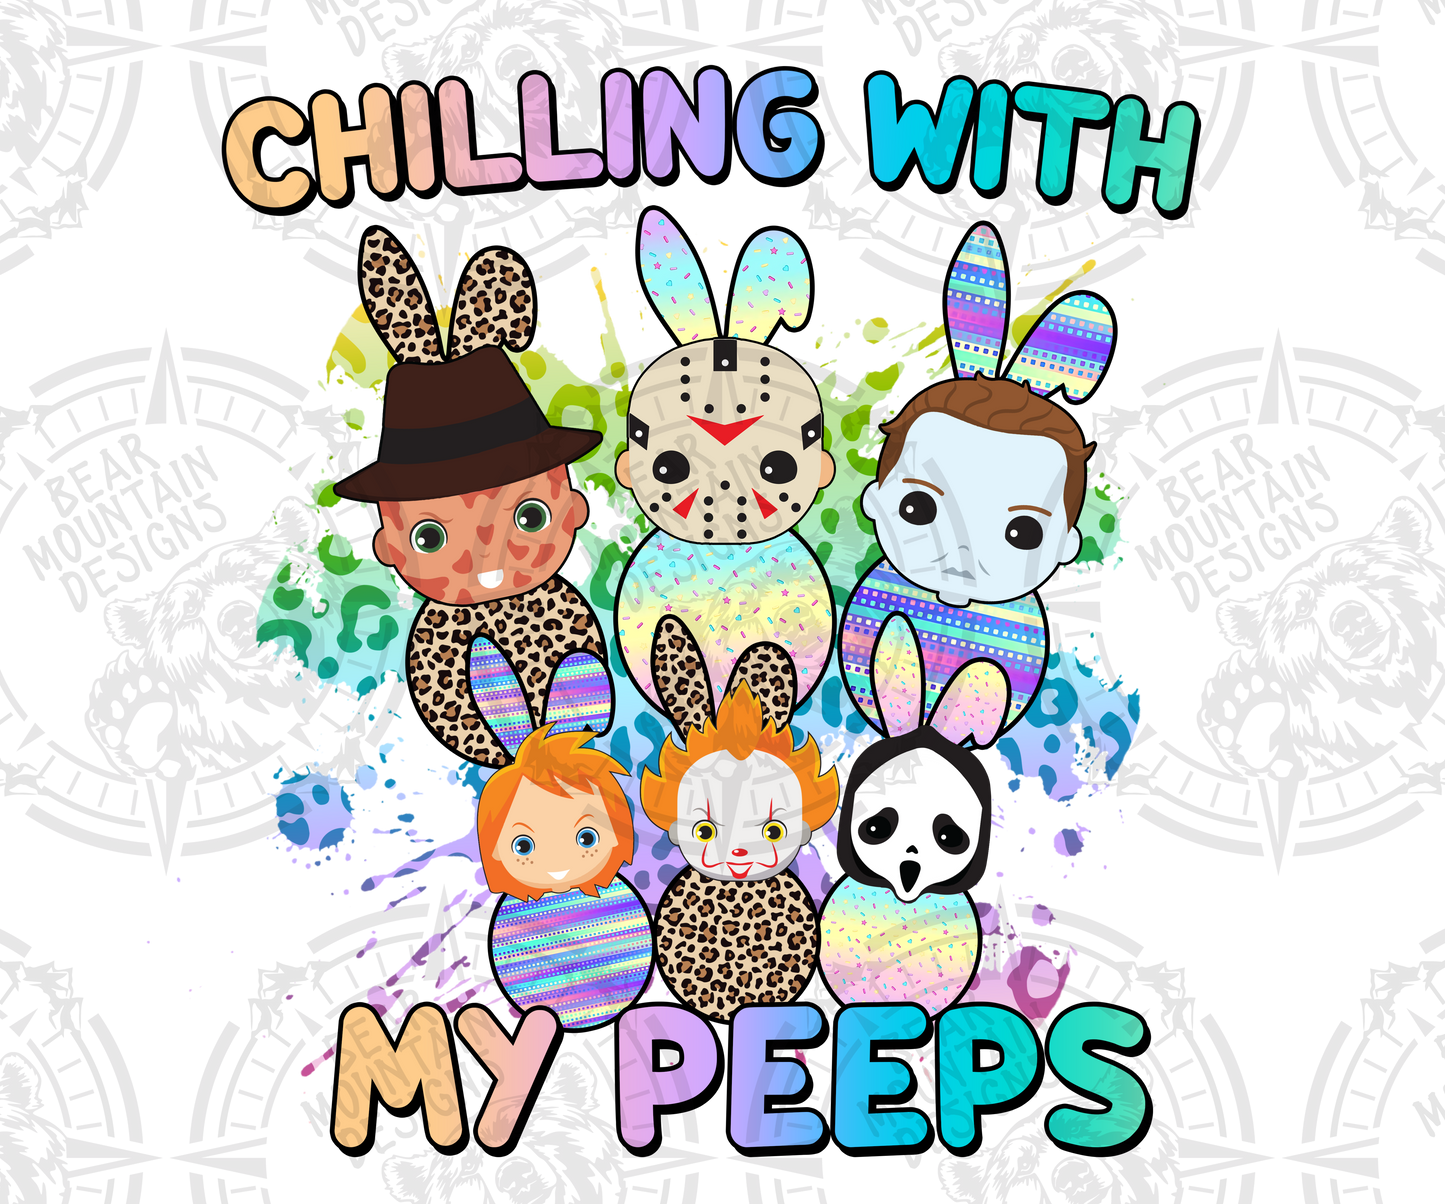 Chillin With My Peeps - Inspired